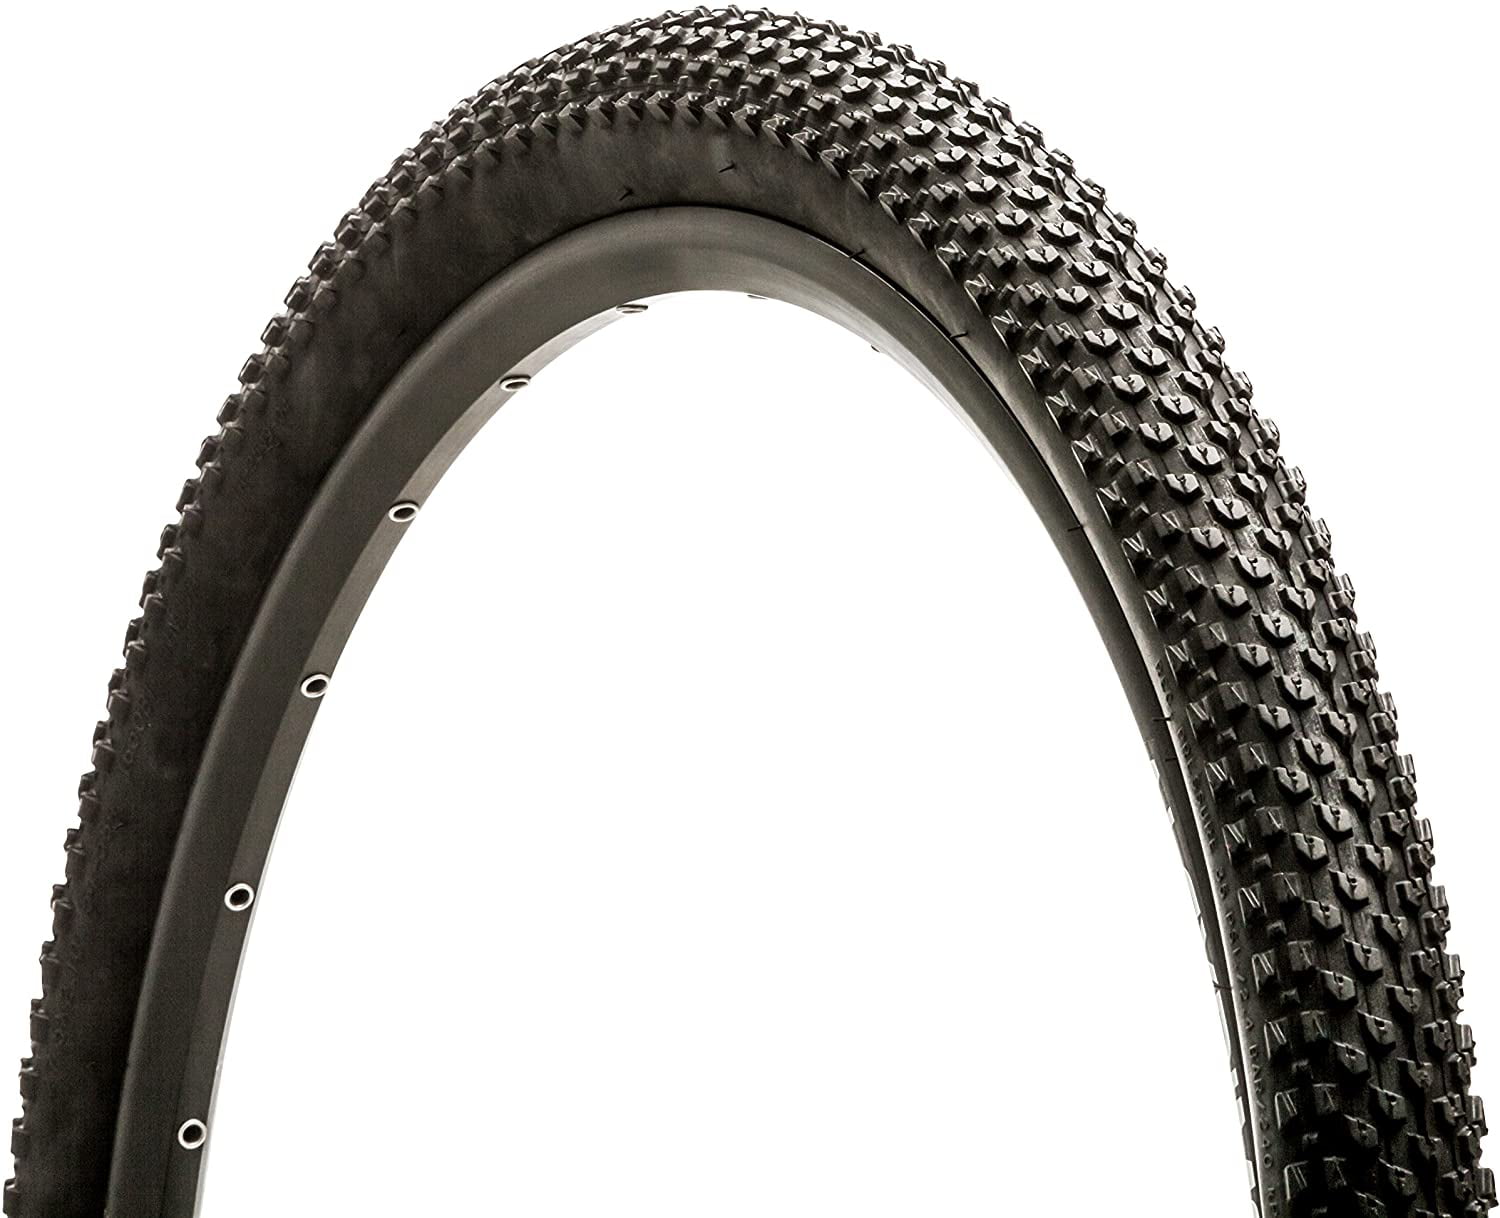 Details about   Good Year Folding Bicycle Tire 700C x 28mm Road Bike Tire New in Box 